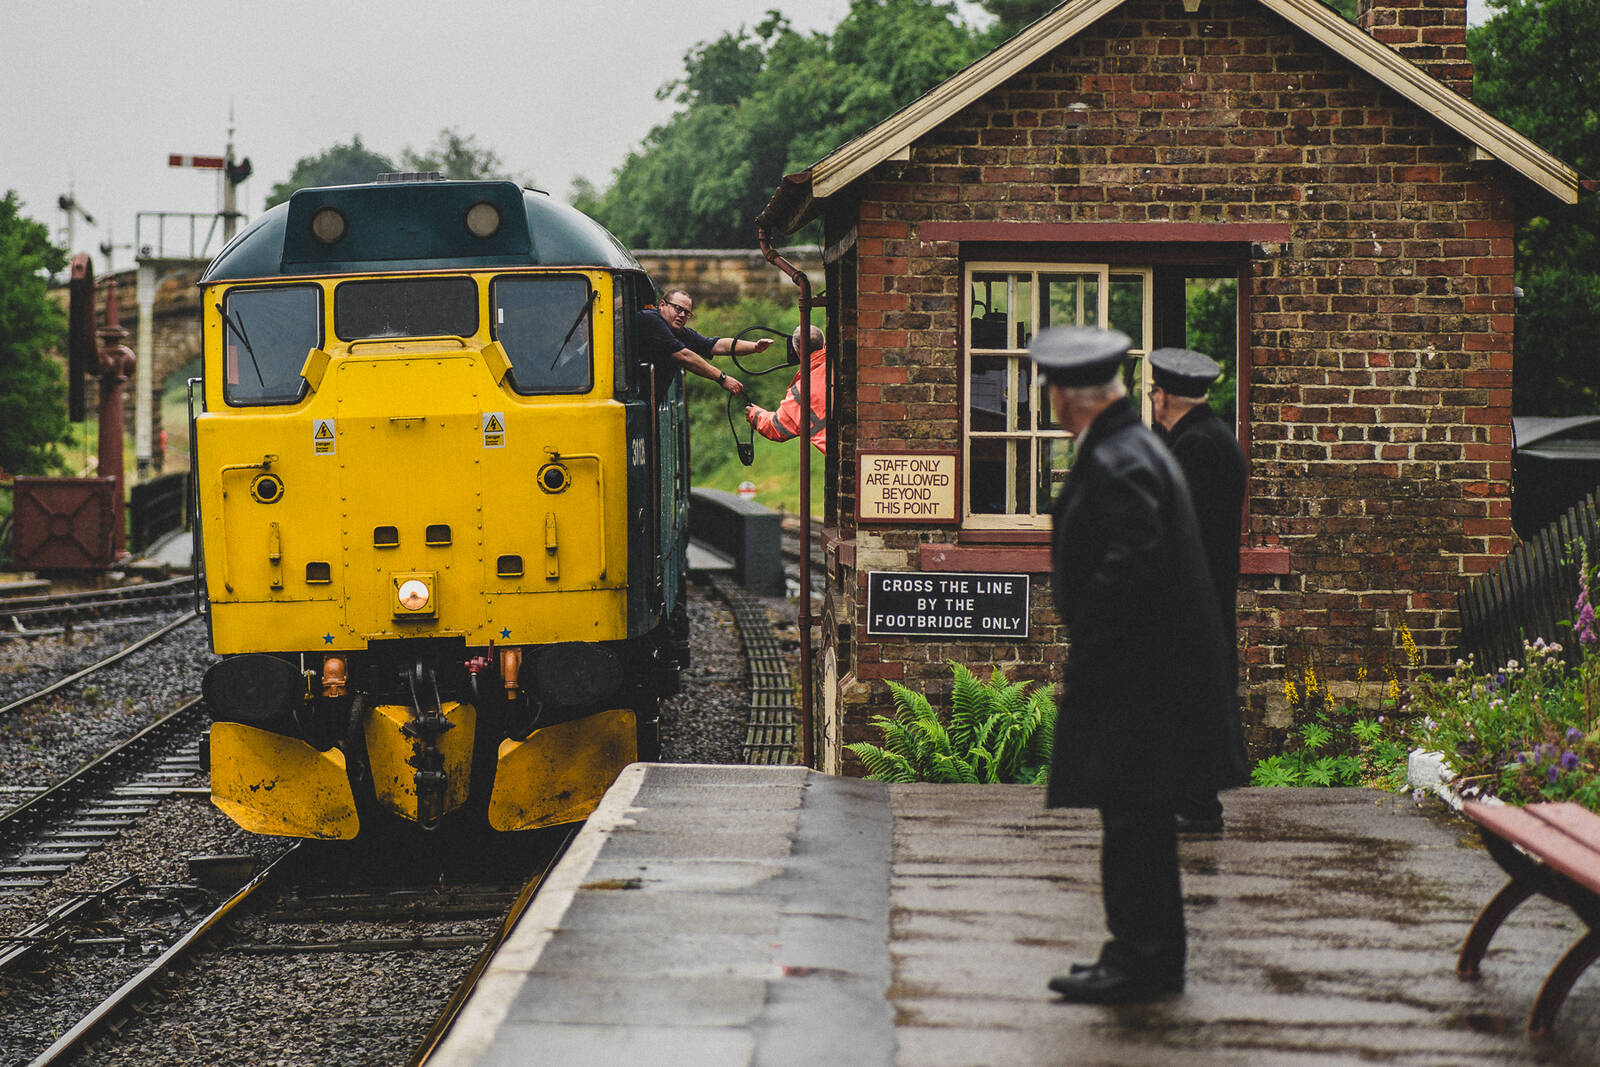 Image of Goathland Station by James Billings.